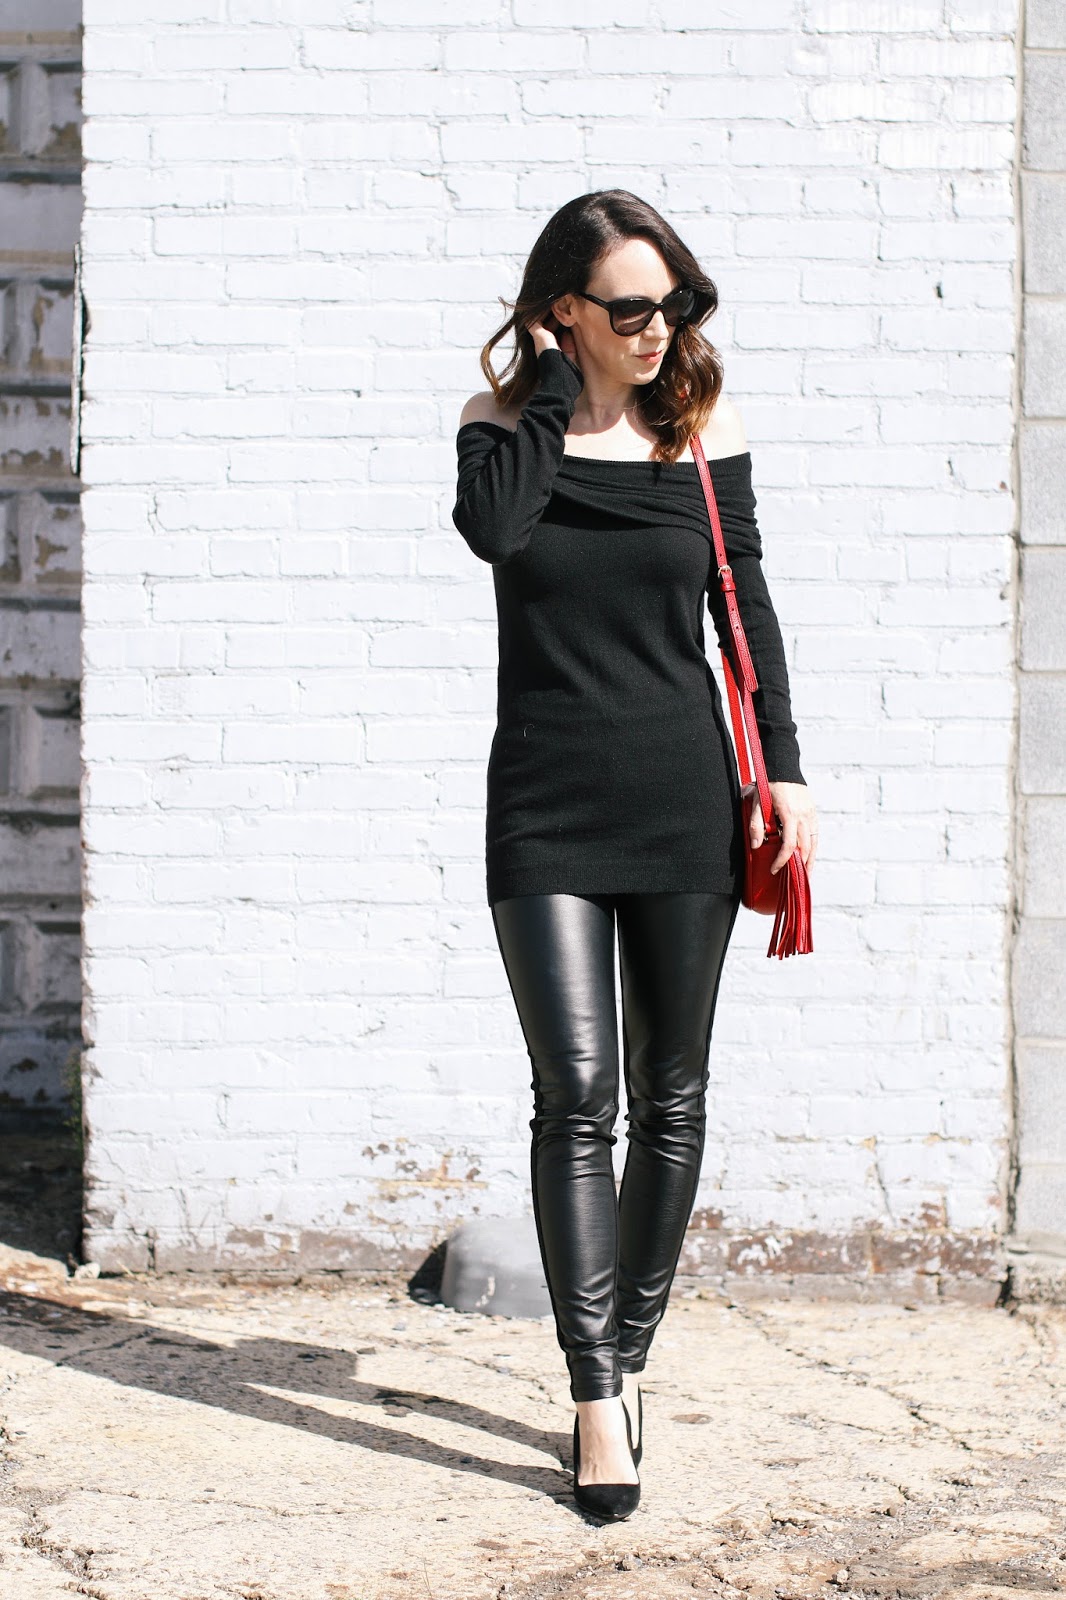 How to style leather leggings